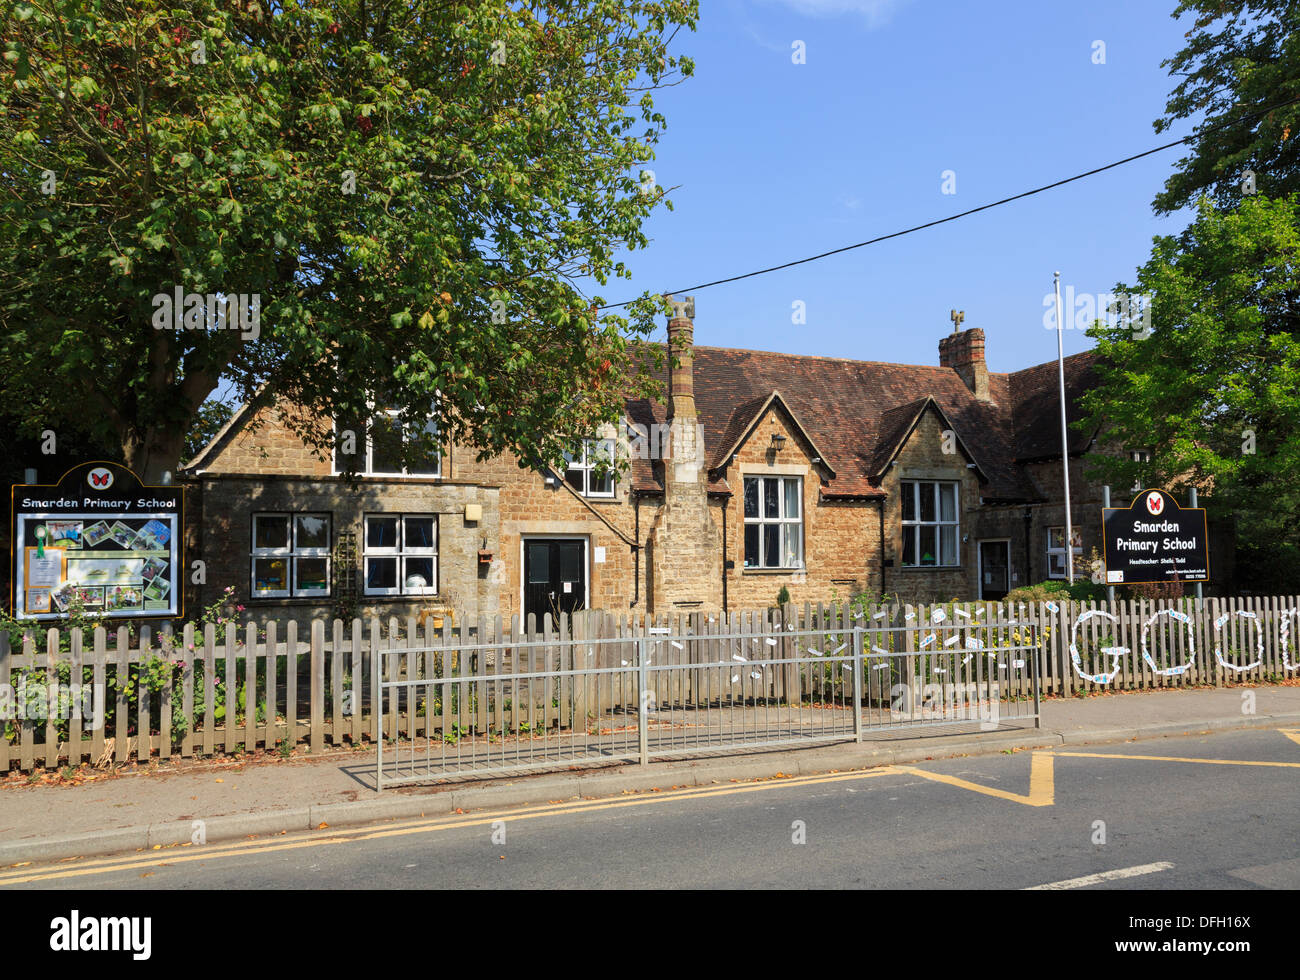 Barrier by front entrance gate to old village primary school in Smarden, Kent, England, UK, Britain Stock Photo